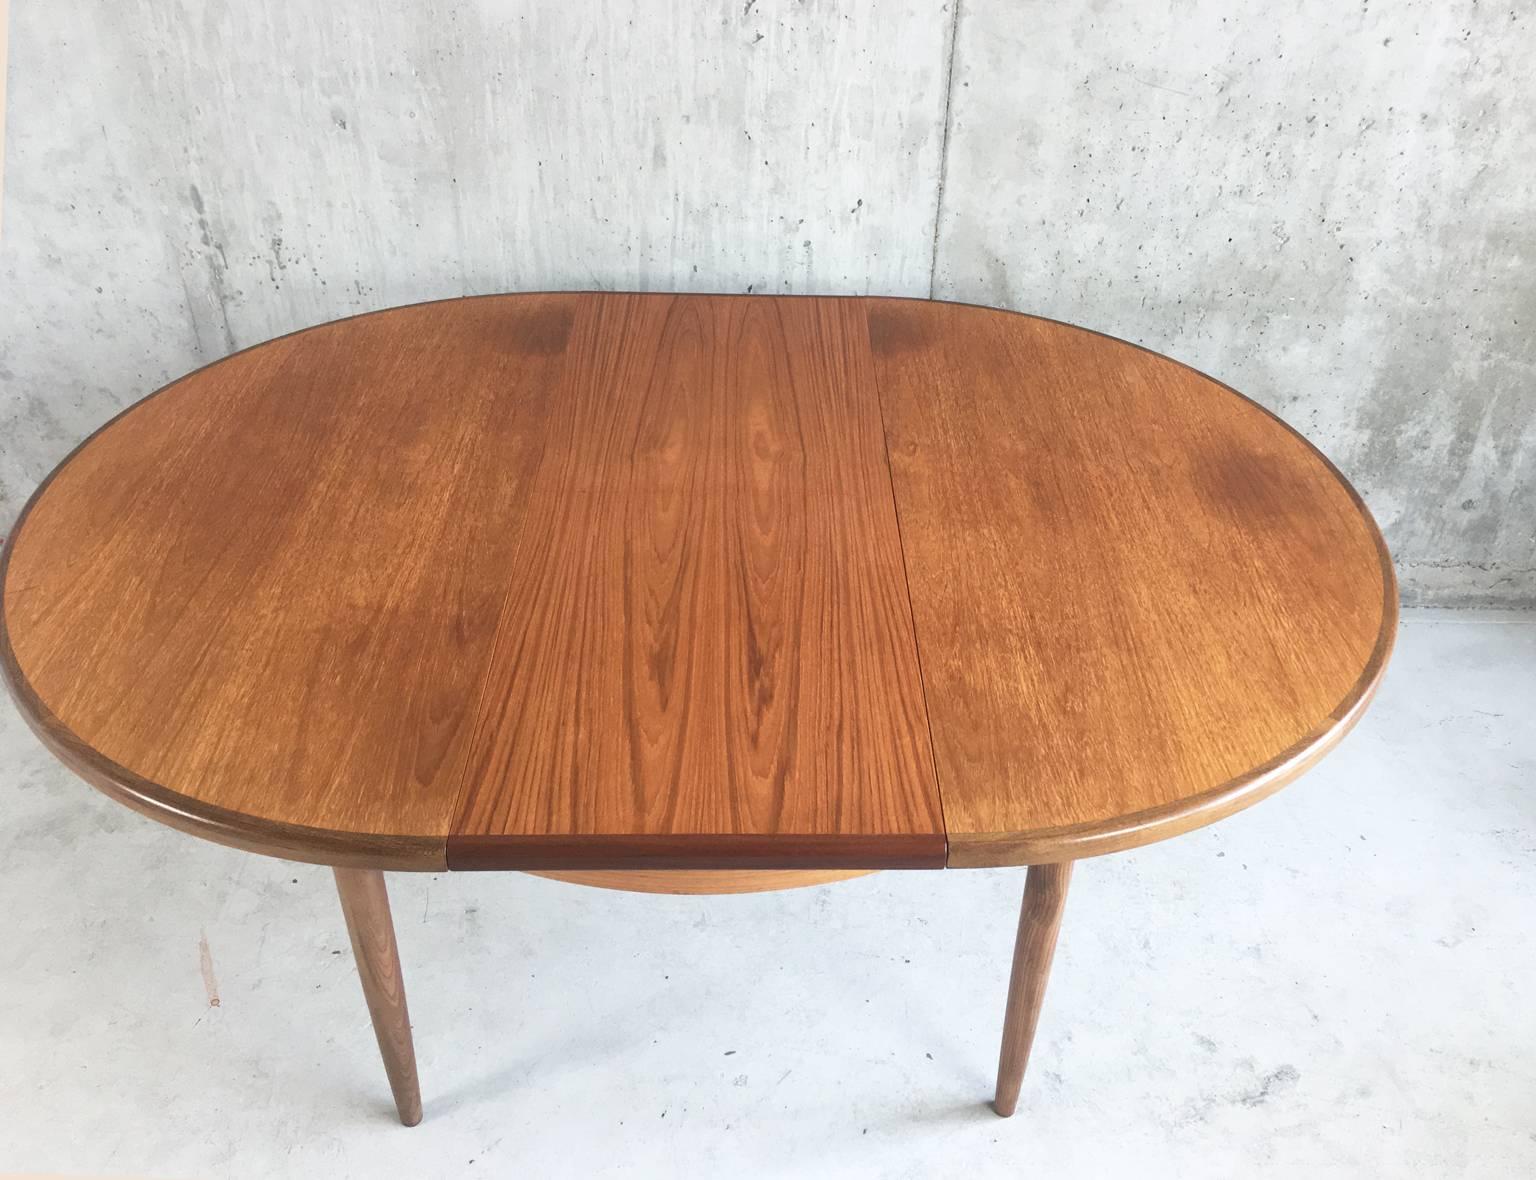 Great Britain (UK) 1970s G Plan Mid-Century Extendable Teak Dining Table For Sale